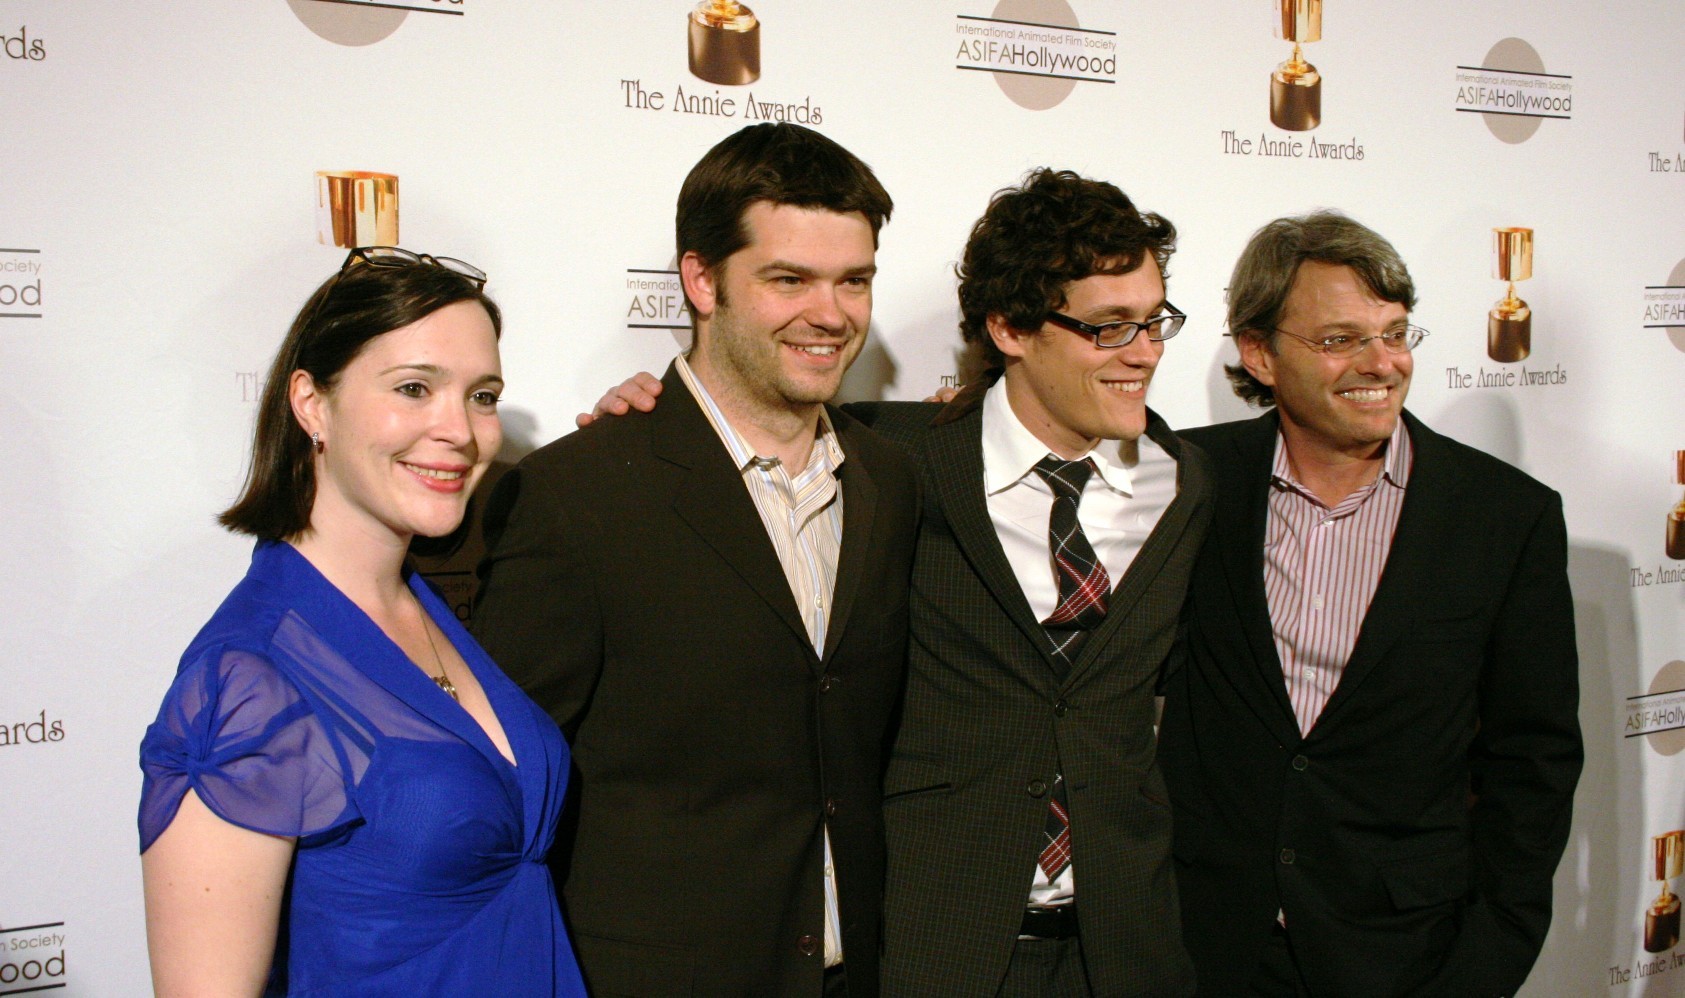 Studio execs Hannah Minghella and Bob Osher flank directors of Cloudy with a Chance of Meatballs, Phil Lord and Chris Miller